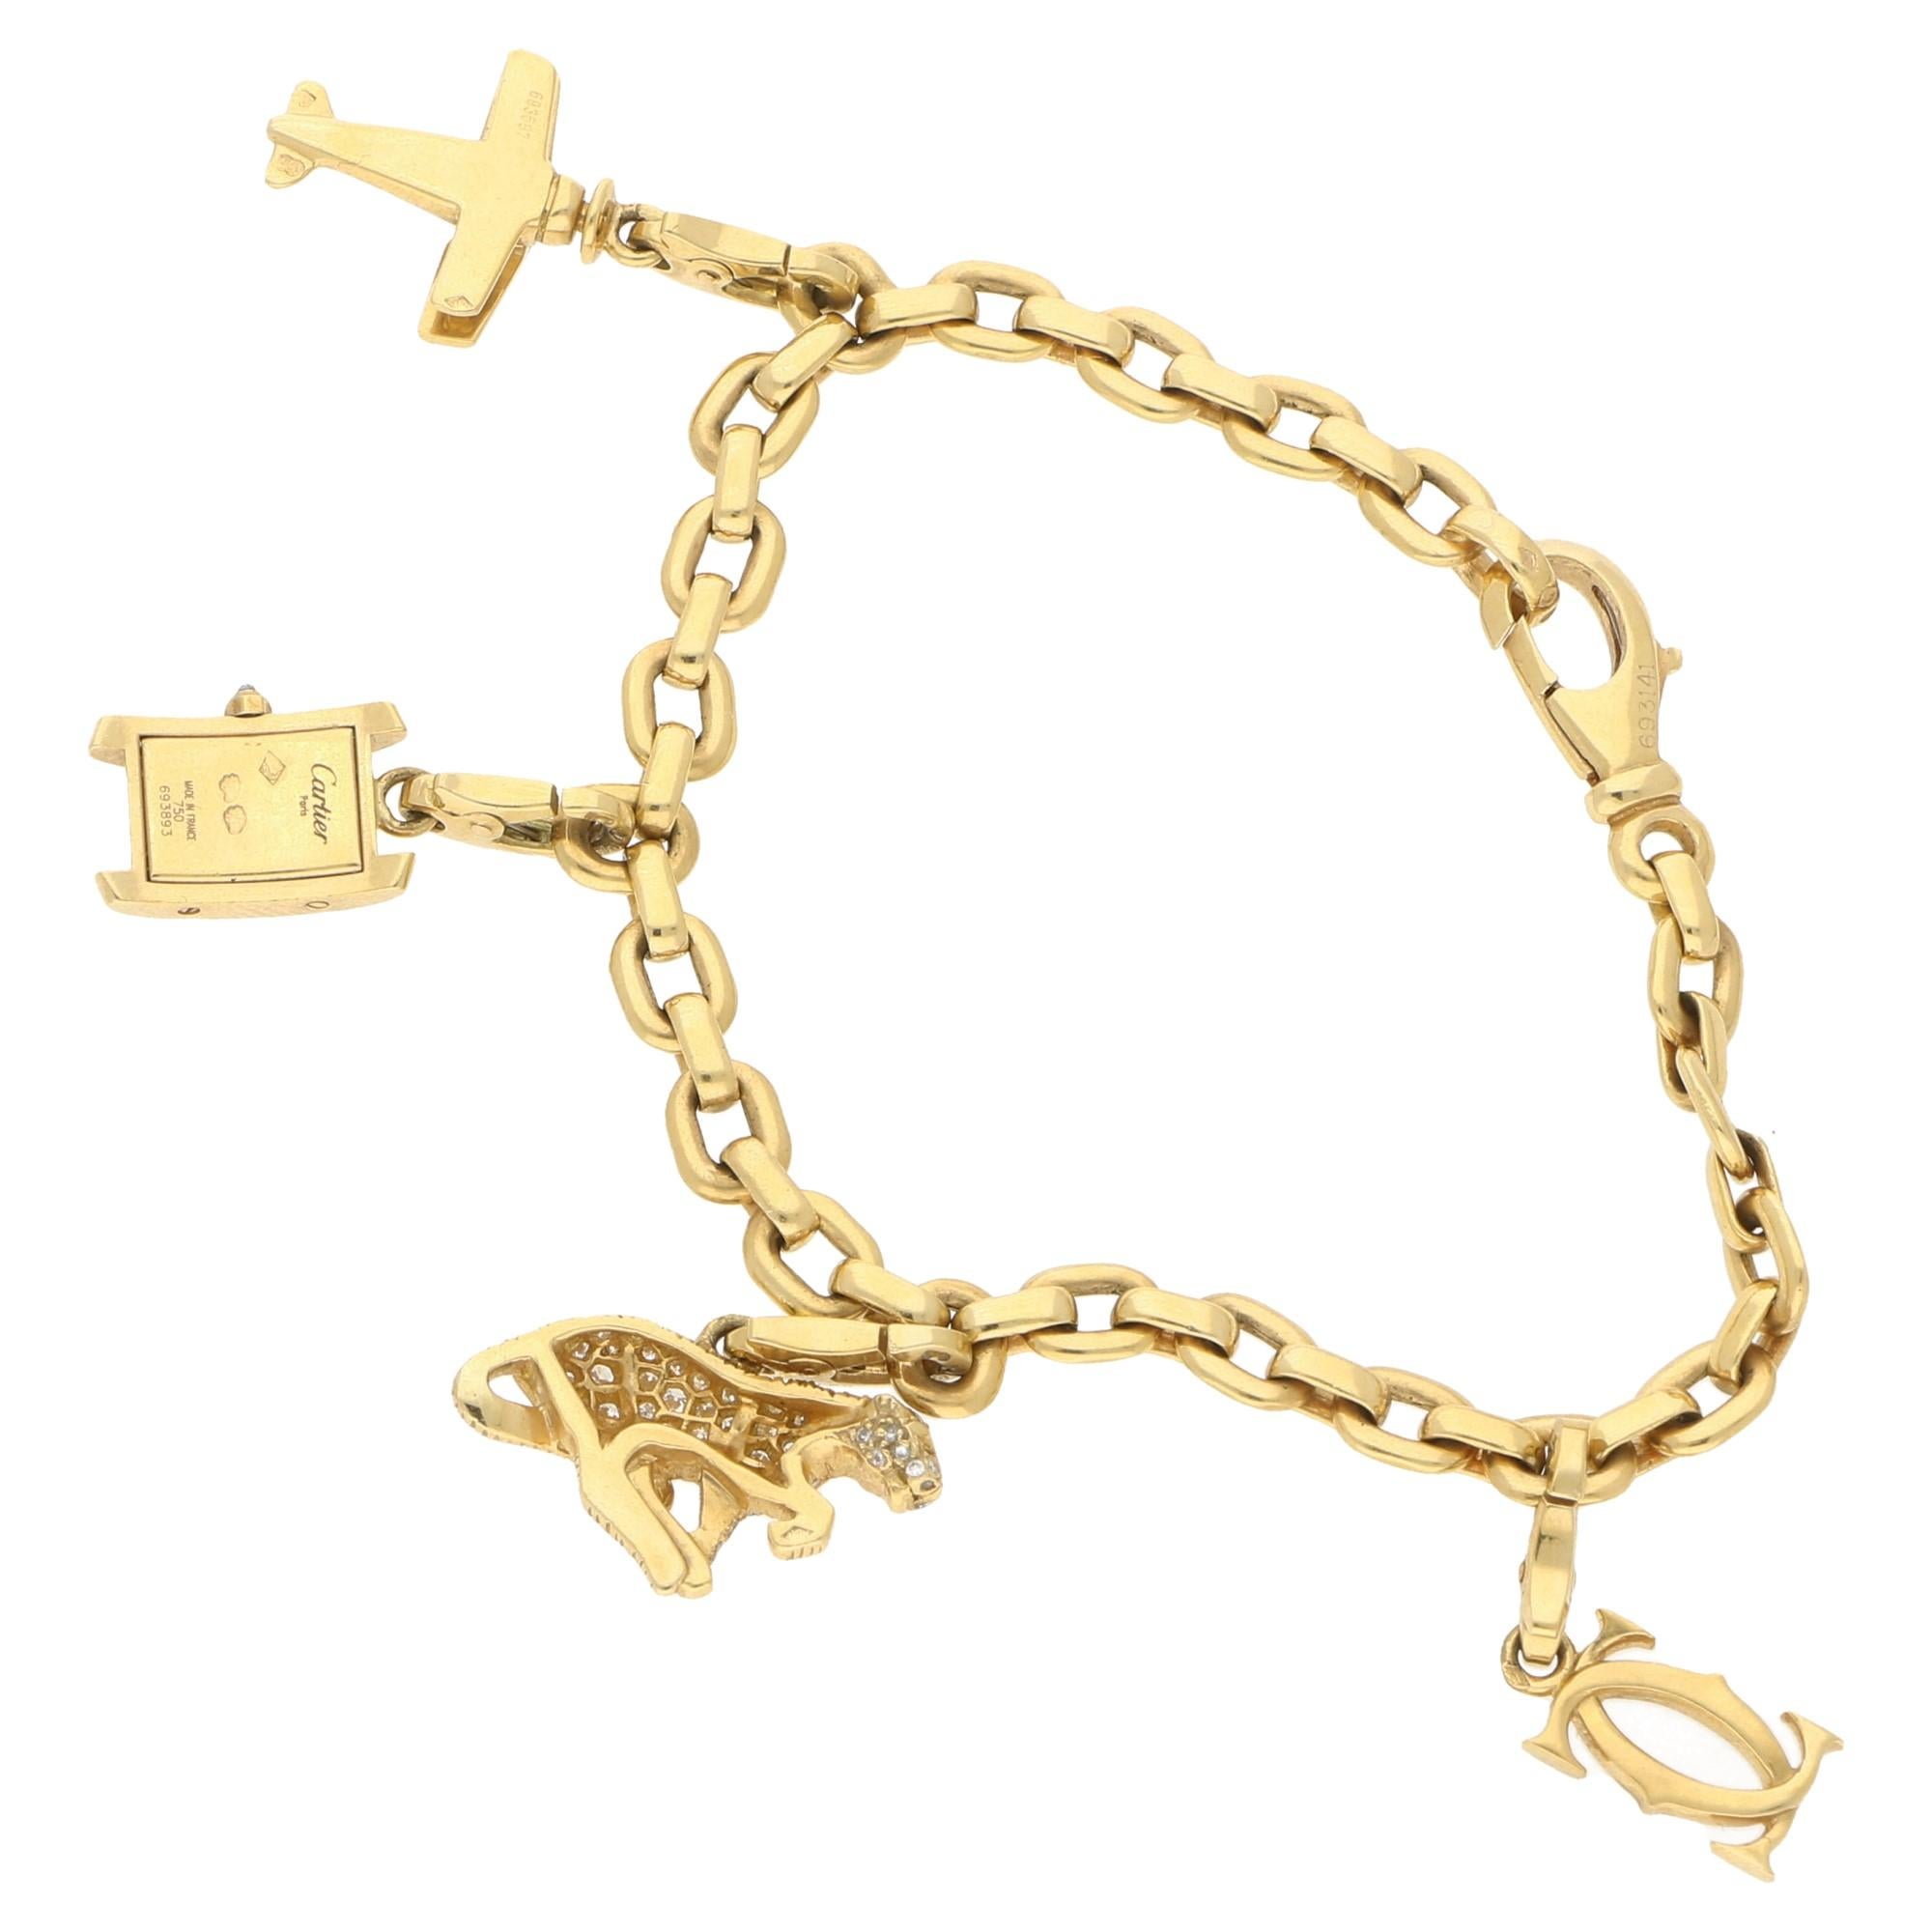 A Cartier charm bracelet in 18-karat yellow gold, with all the charms also in 18-karat yellow gold. The bracelet is designed as a trace link chain fitted with a lobster clasp fitting and is adorned with four emblematic Cartier charms with similar